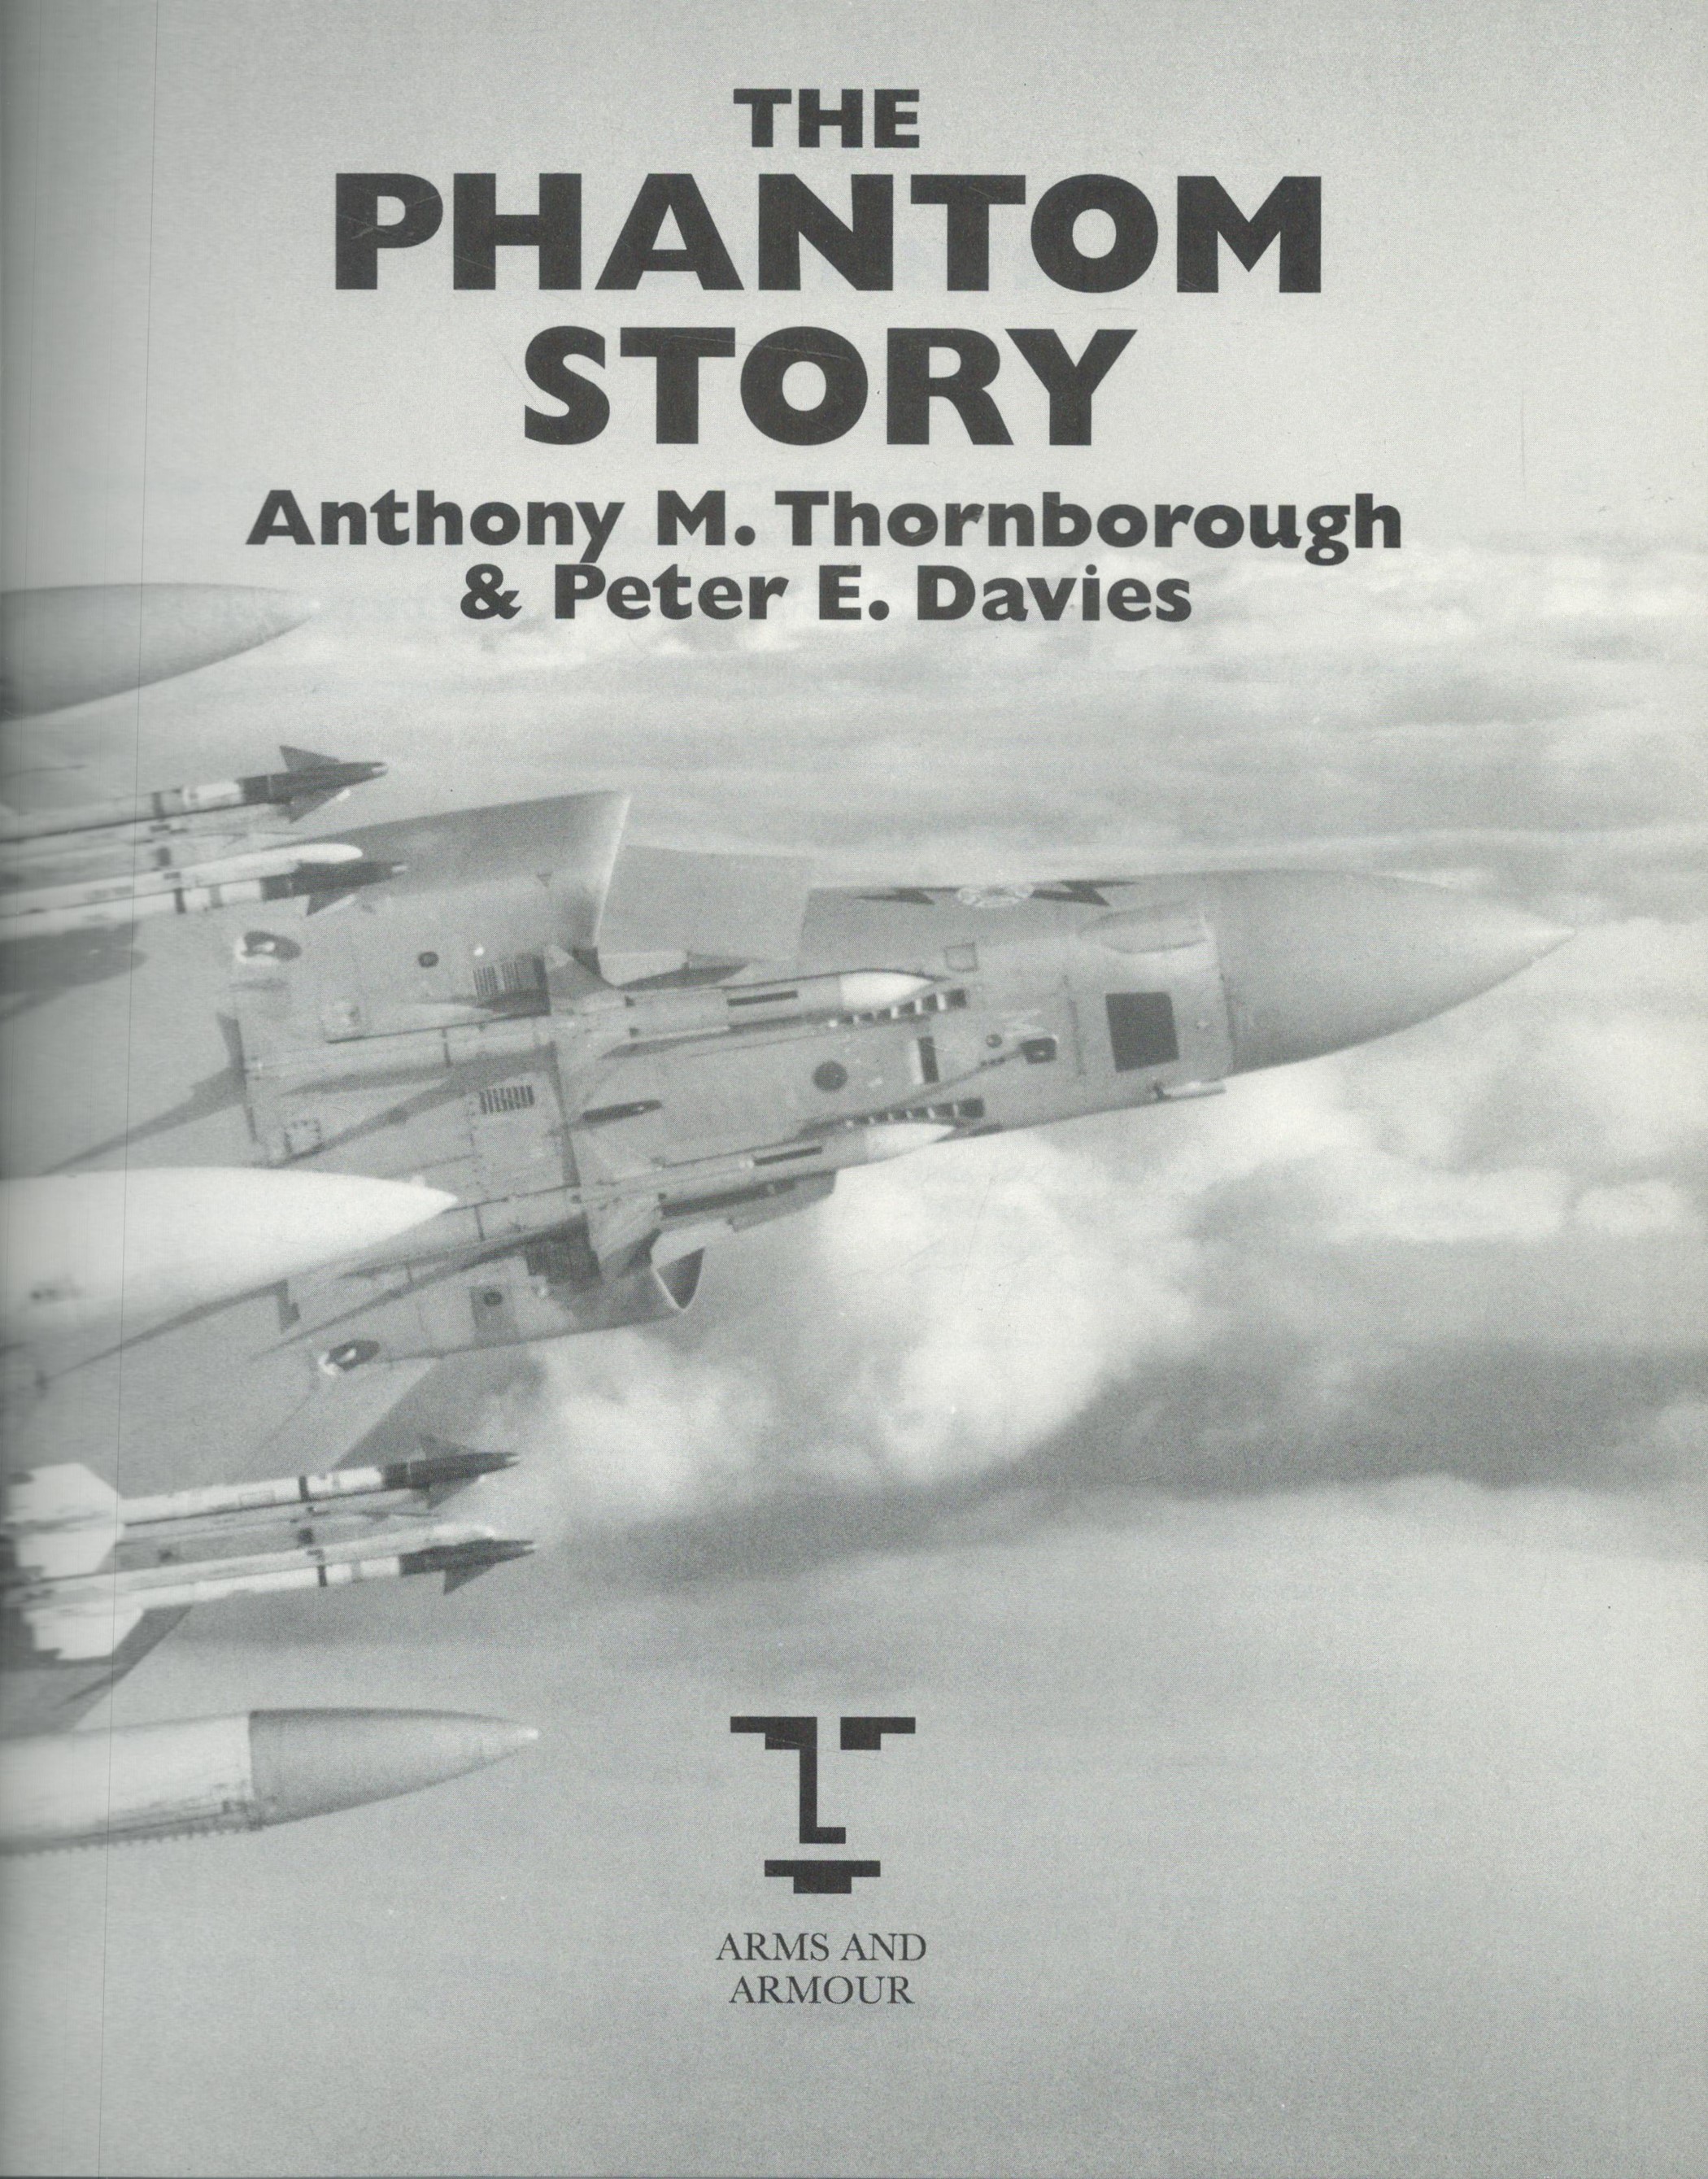 The Phantom Story by Anthony M. Thornborough and Peter E. Davies, First Edition book Signed by 2 - Image 4 of 5